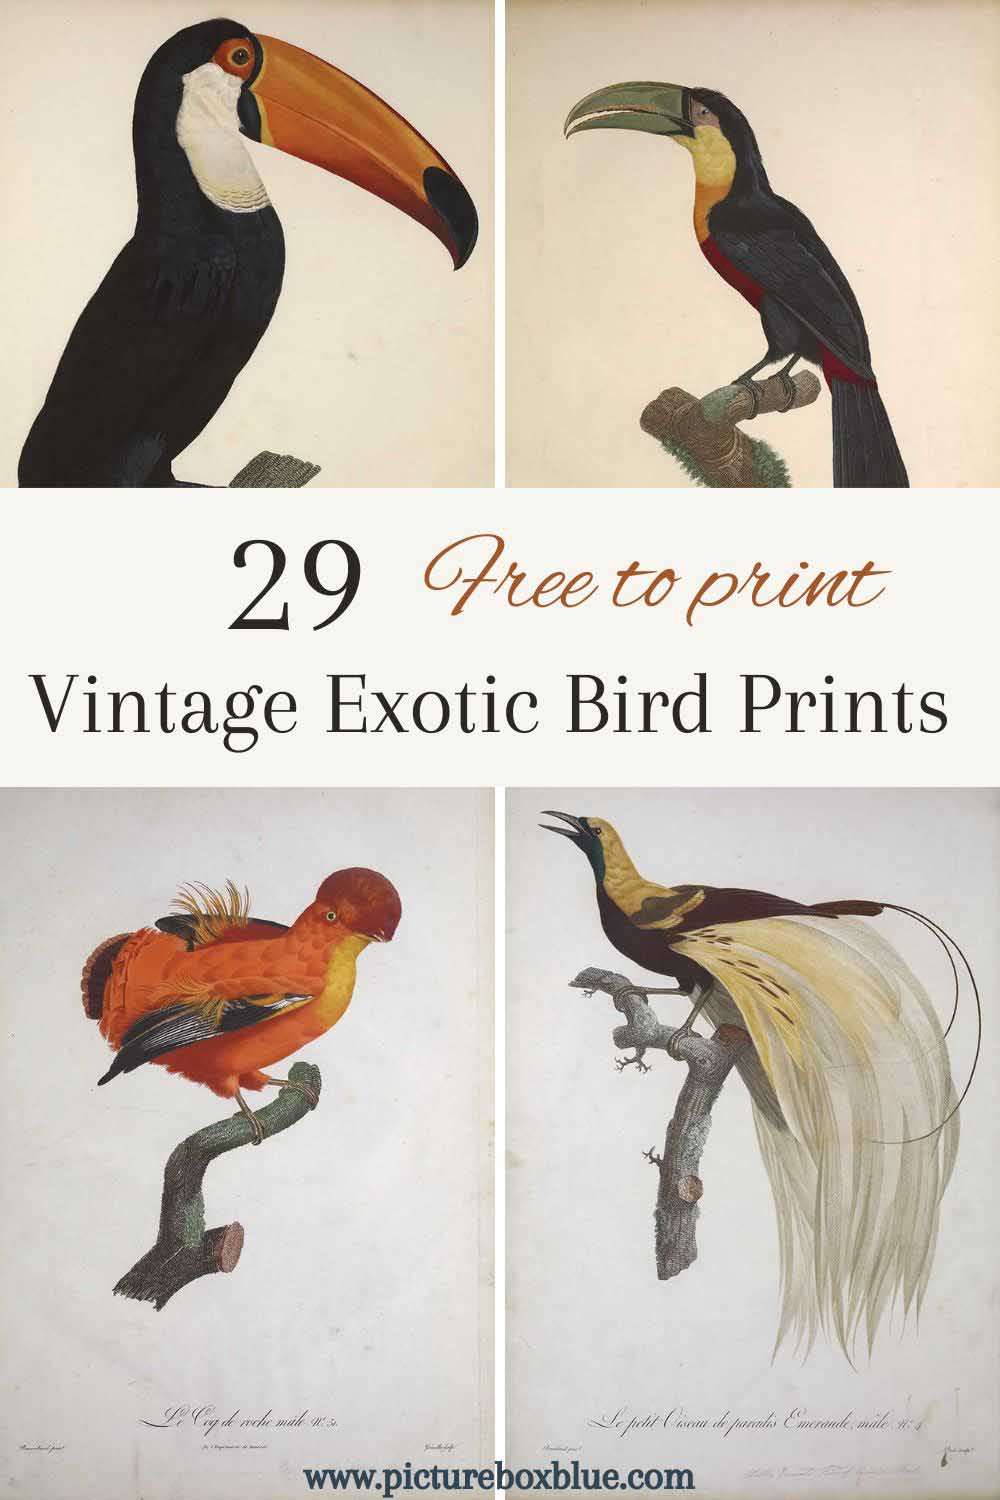 four exotic bird paintings by Le Vaillant for a pin image includes a toucan and bird of paradise